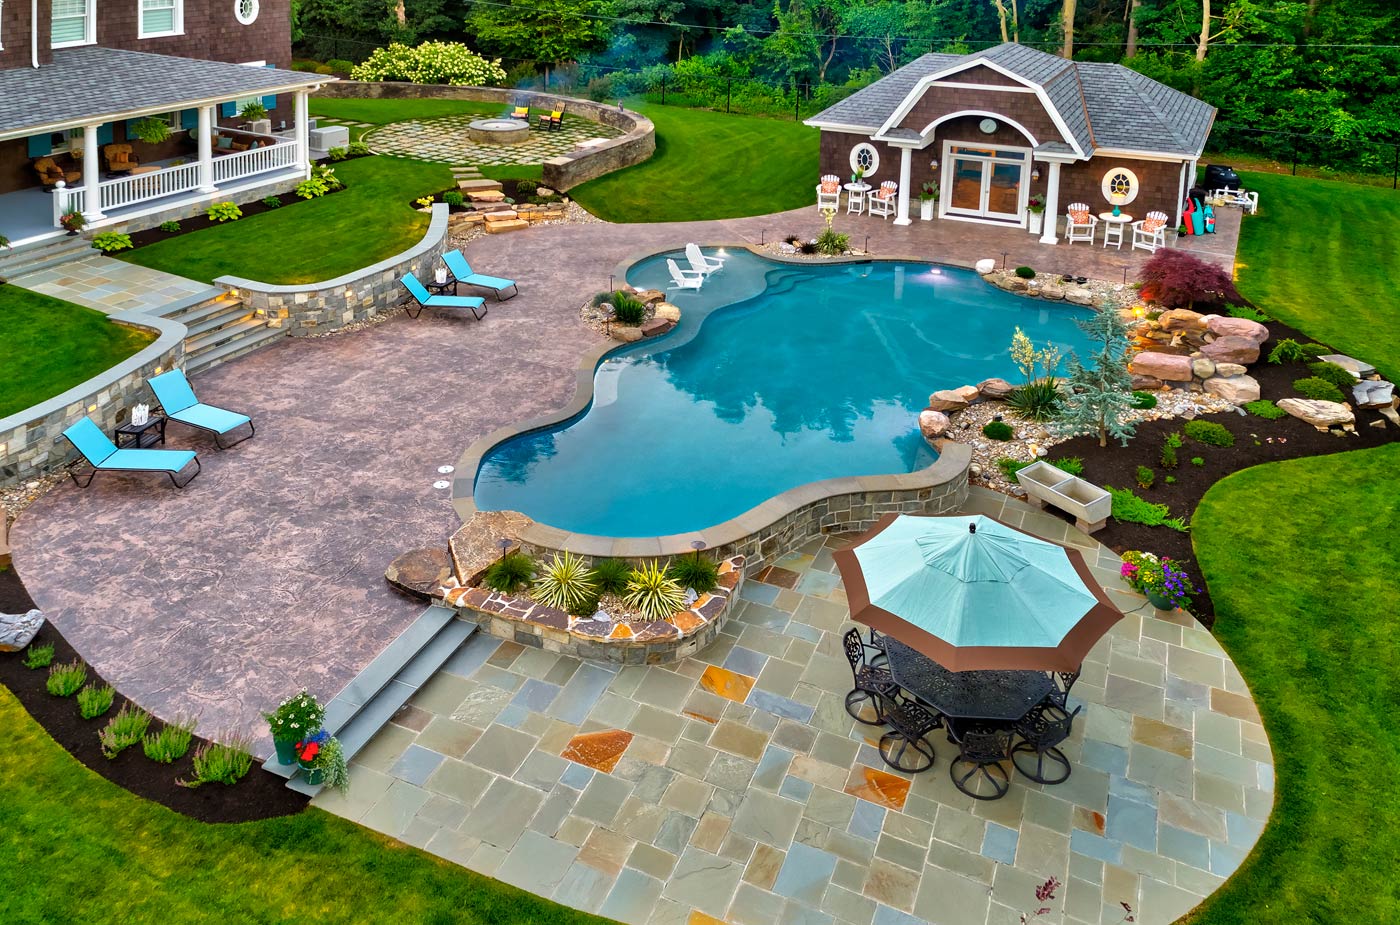 The Best Pool Trends We Expect to See in 2019 - Aquavisions